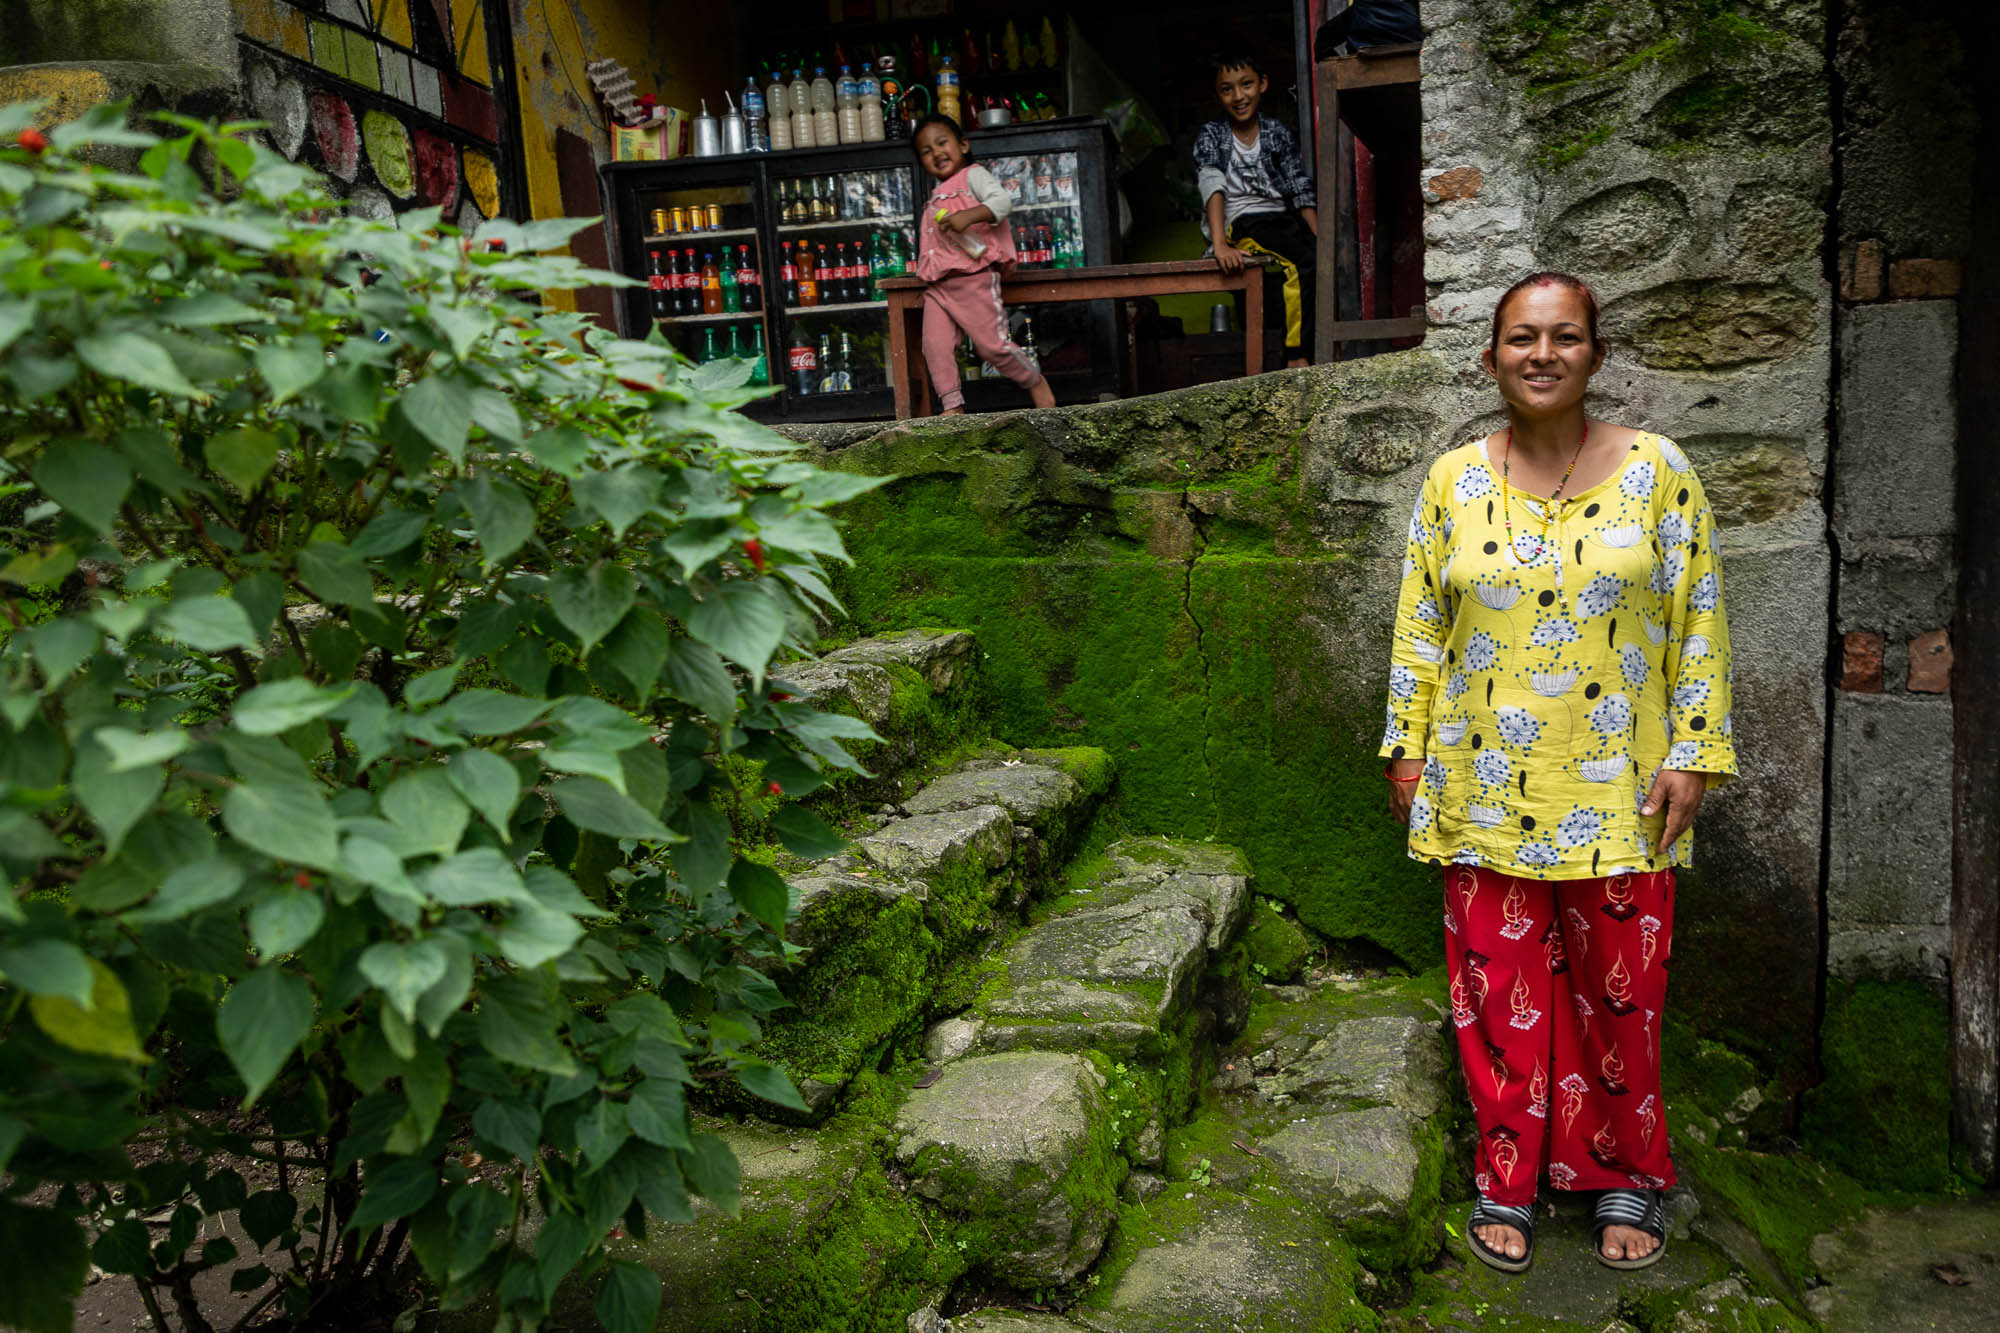 Sabina Shrestha stands in front of a shop in Gokarneshwar Municipality. Her family relies on the Bagmati for drinking water and other household use. They are one of the few households that have decided to manage liquid waste without dumping it into the river.